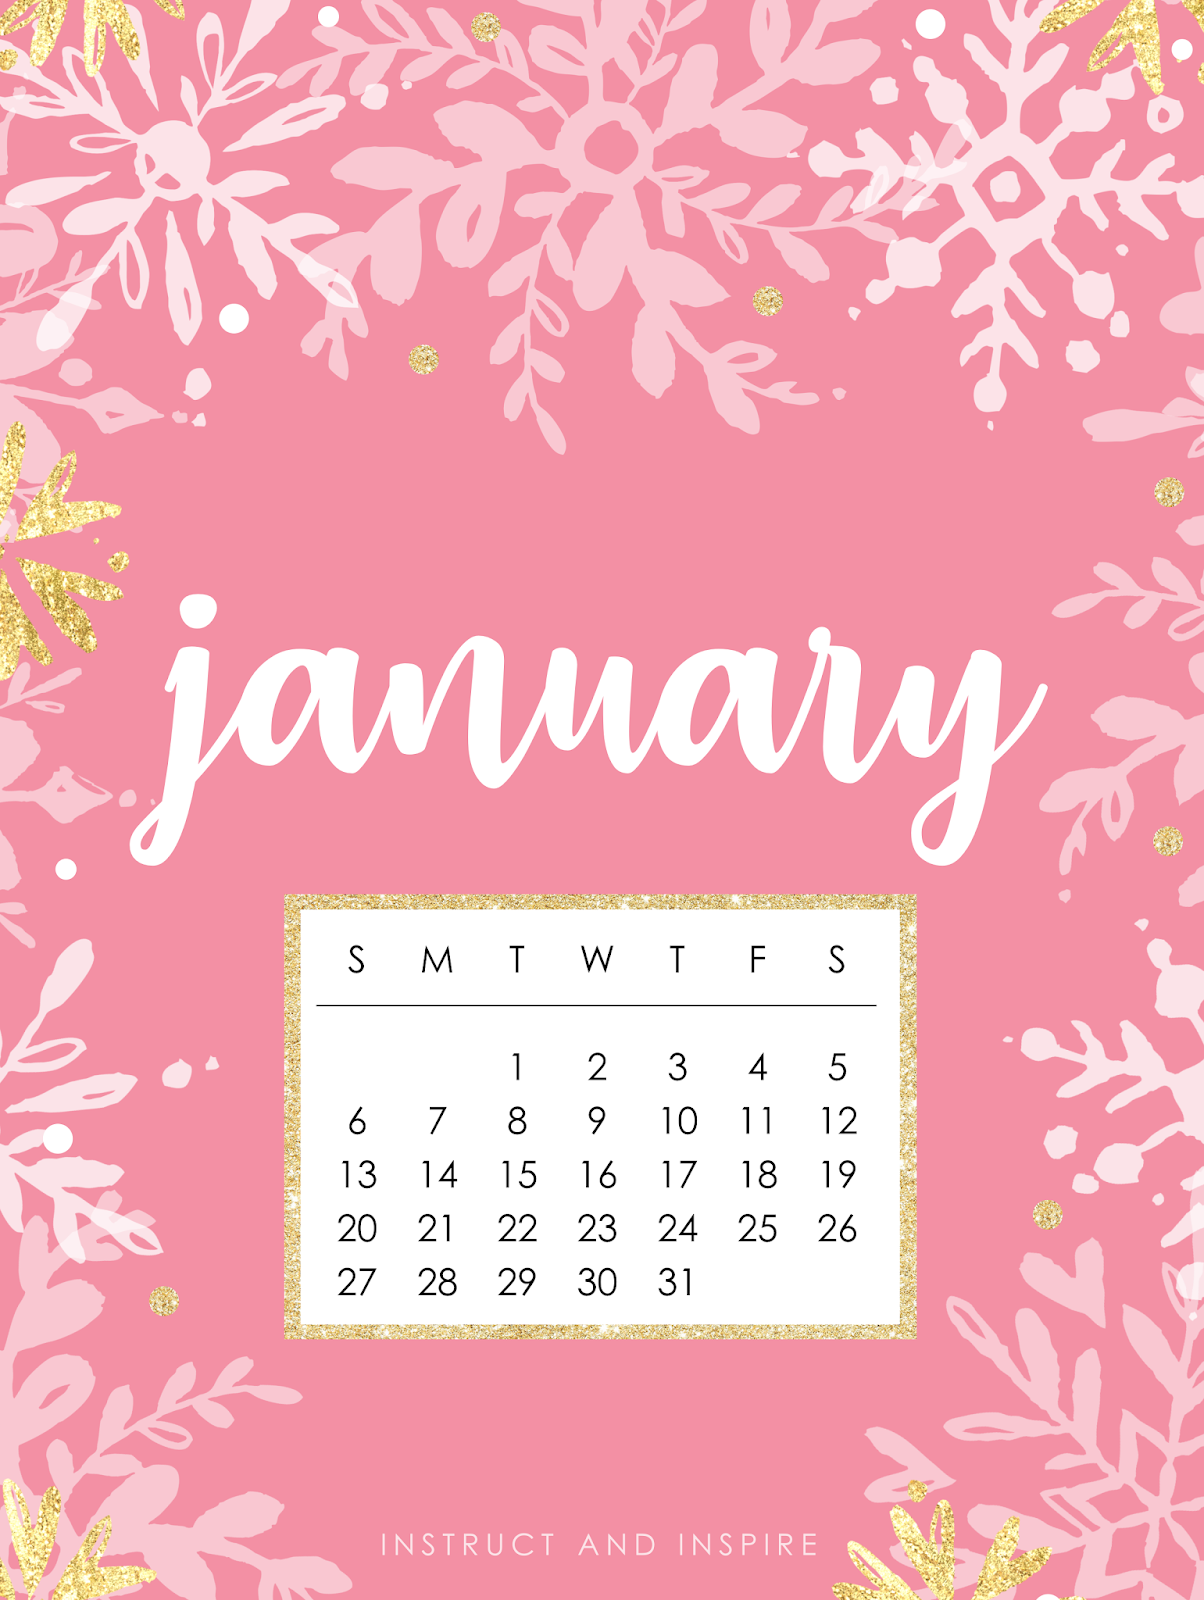 January 2019 Wallpapers | Instruct and Inspire